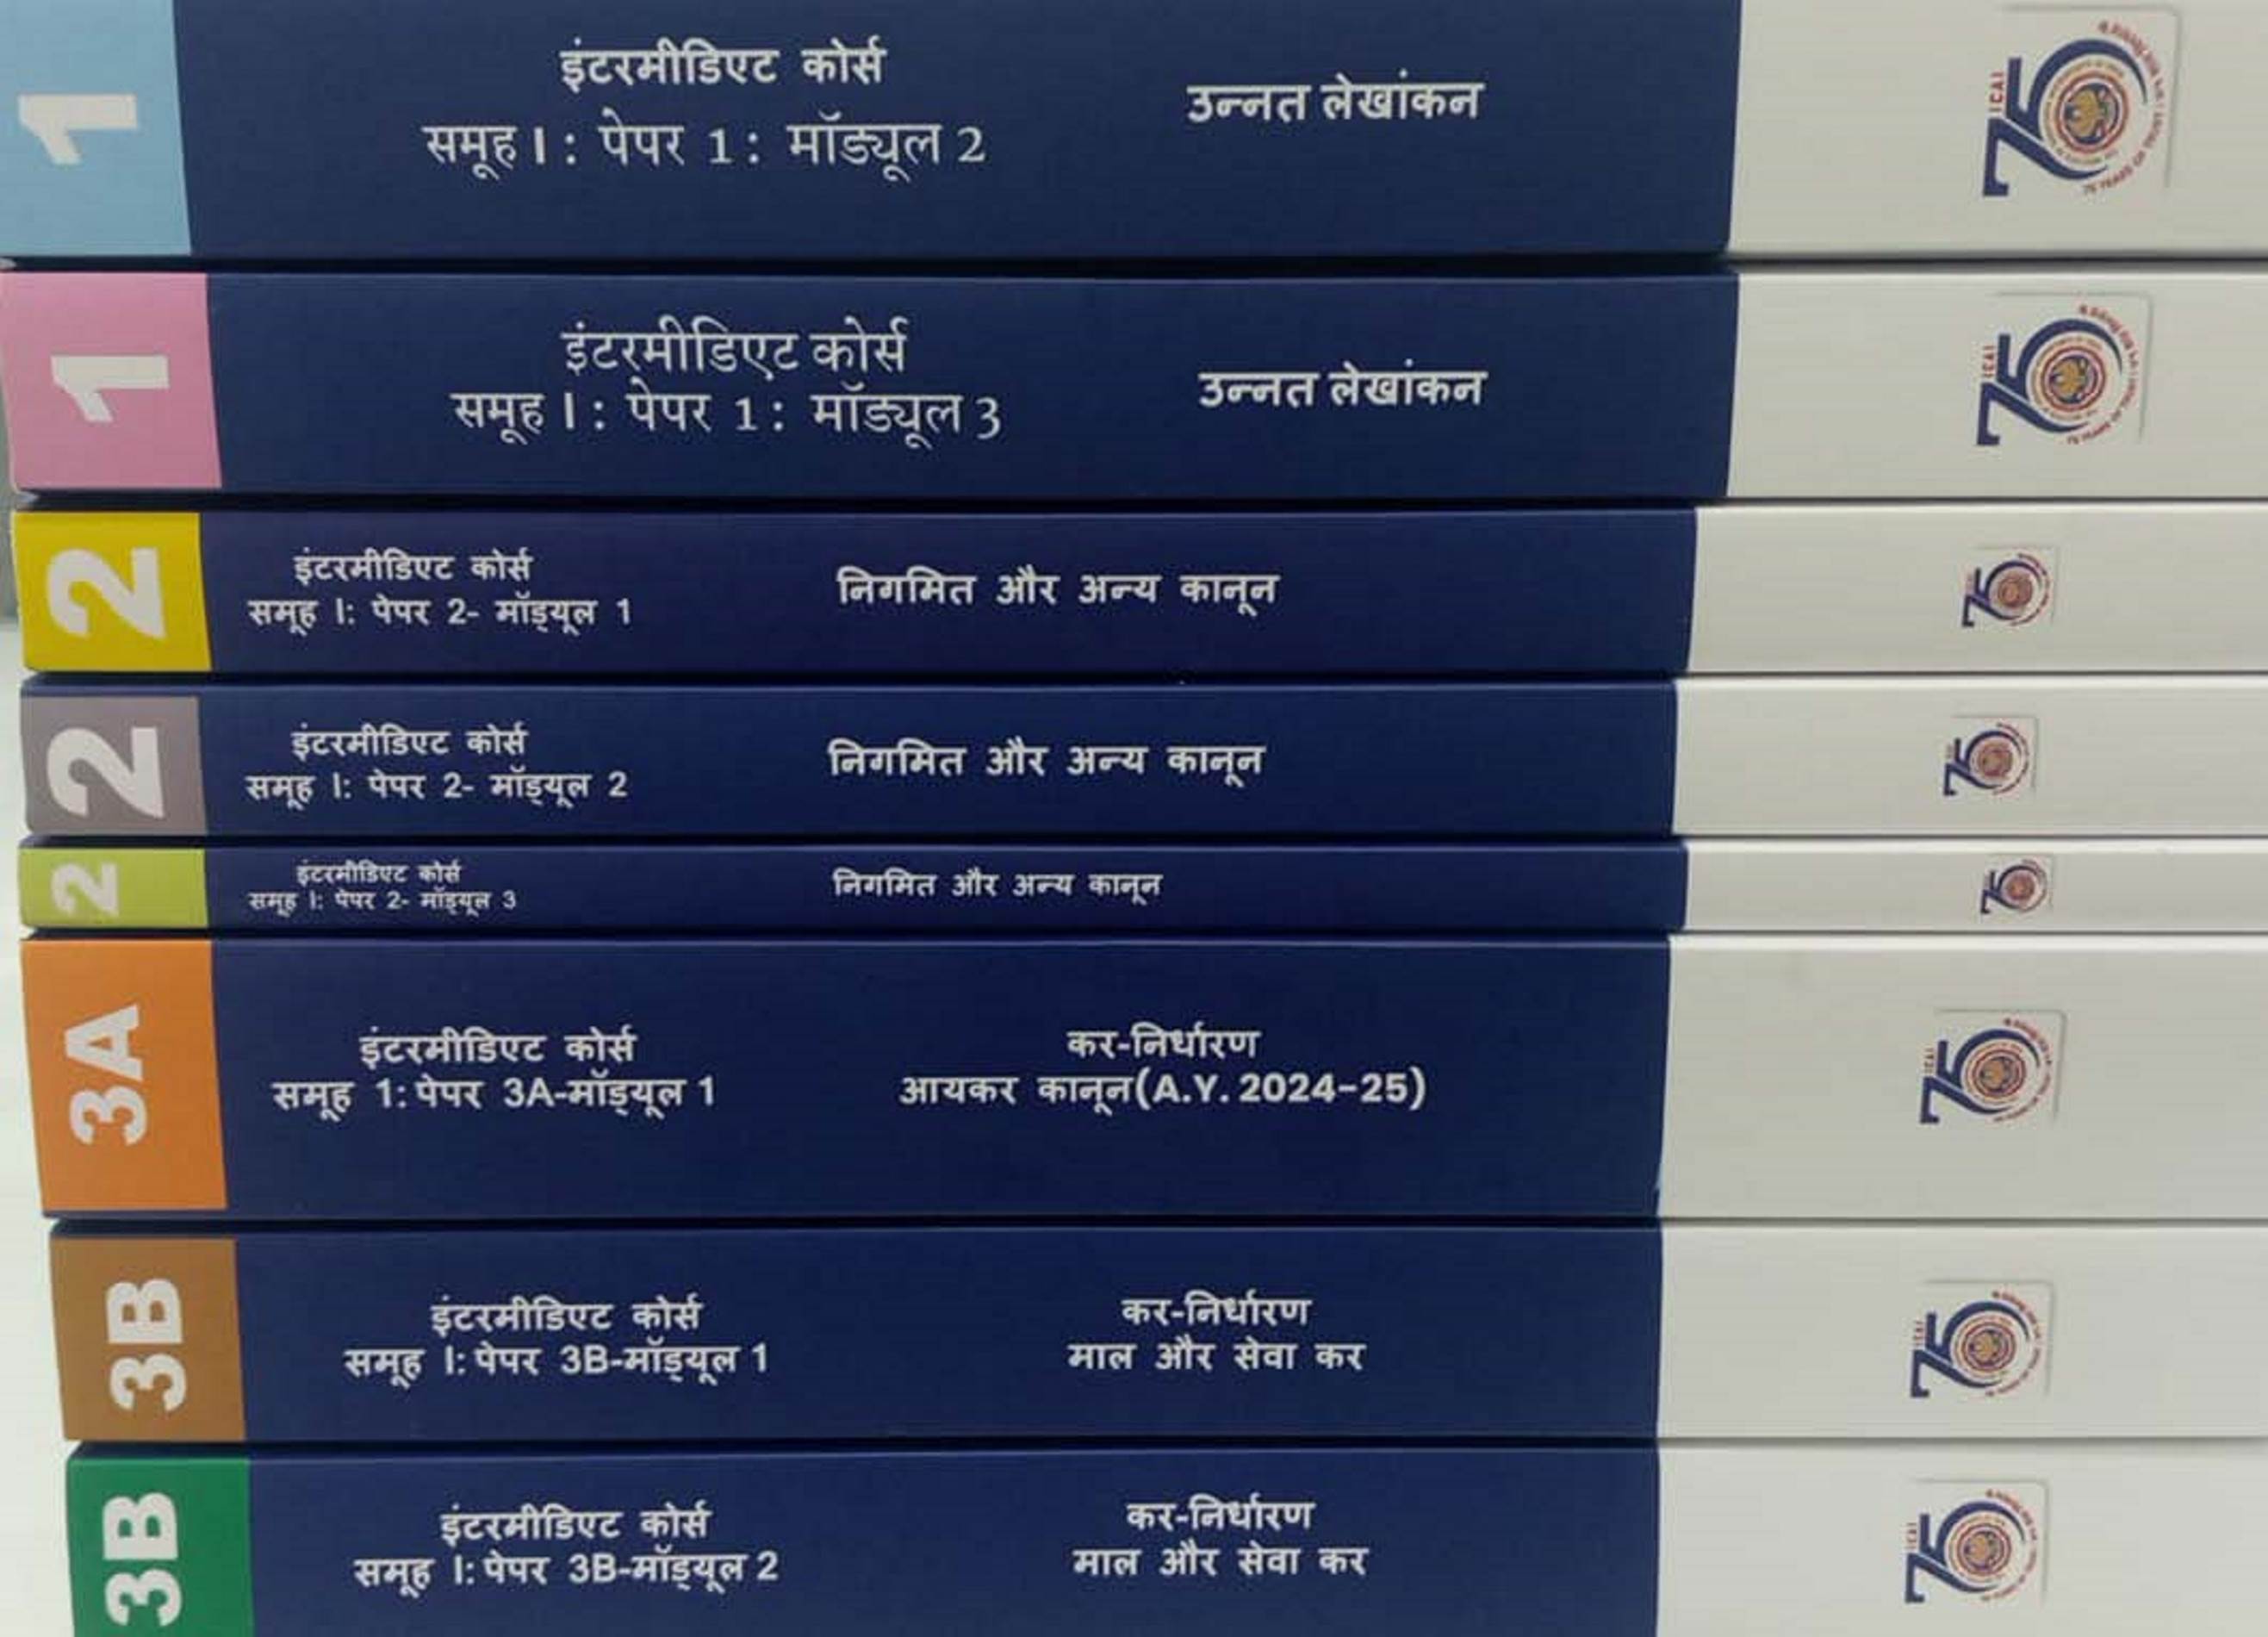 Intermediate Course - Study Kit: Group I (Hindi) (Kit Material) April, 2023, Relevant for May, 2024 Examination & onwards